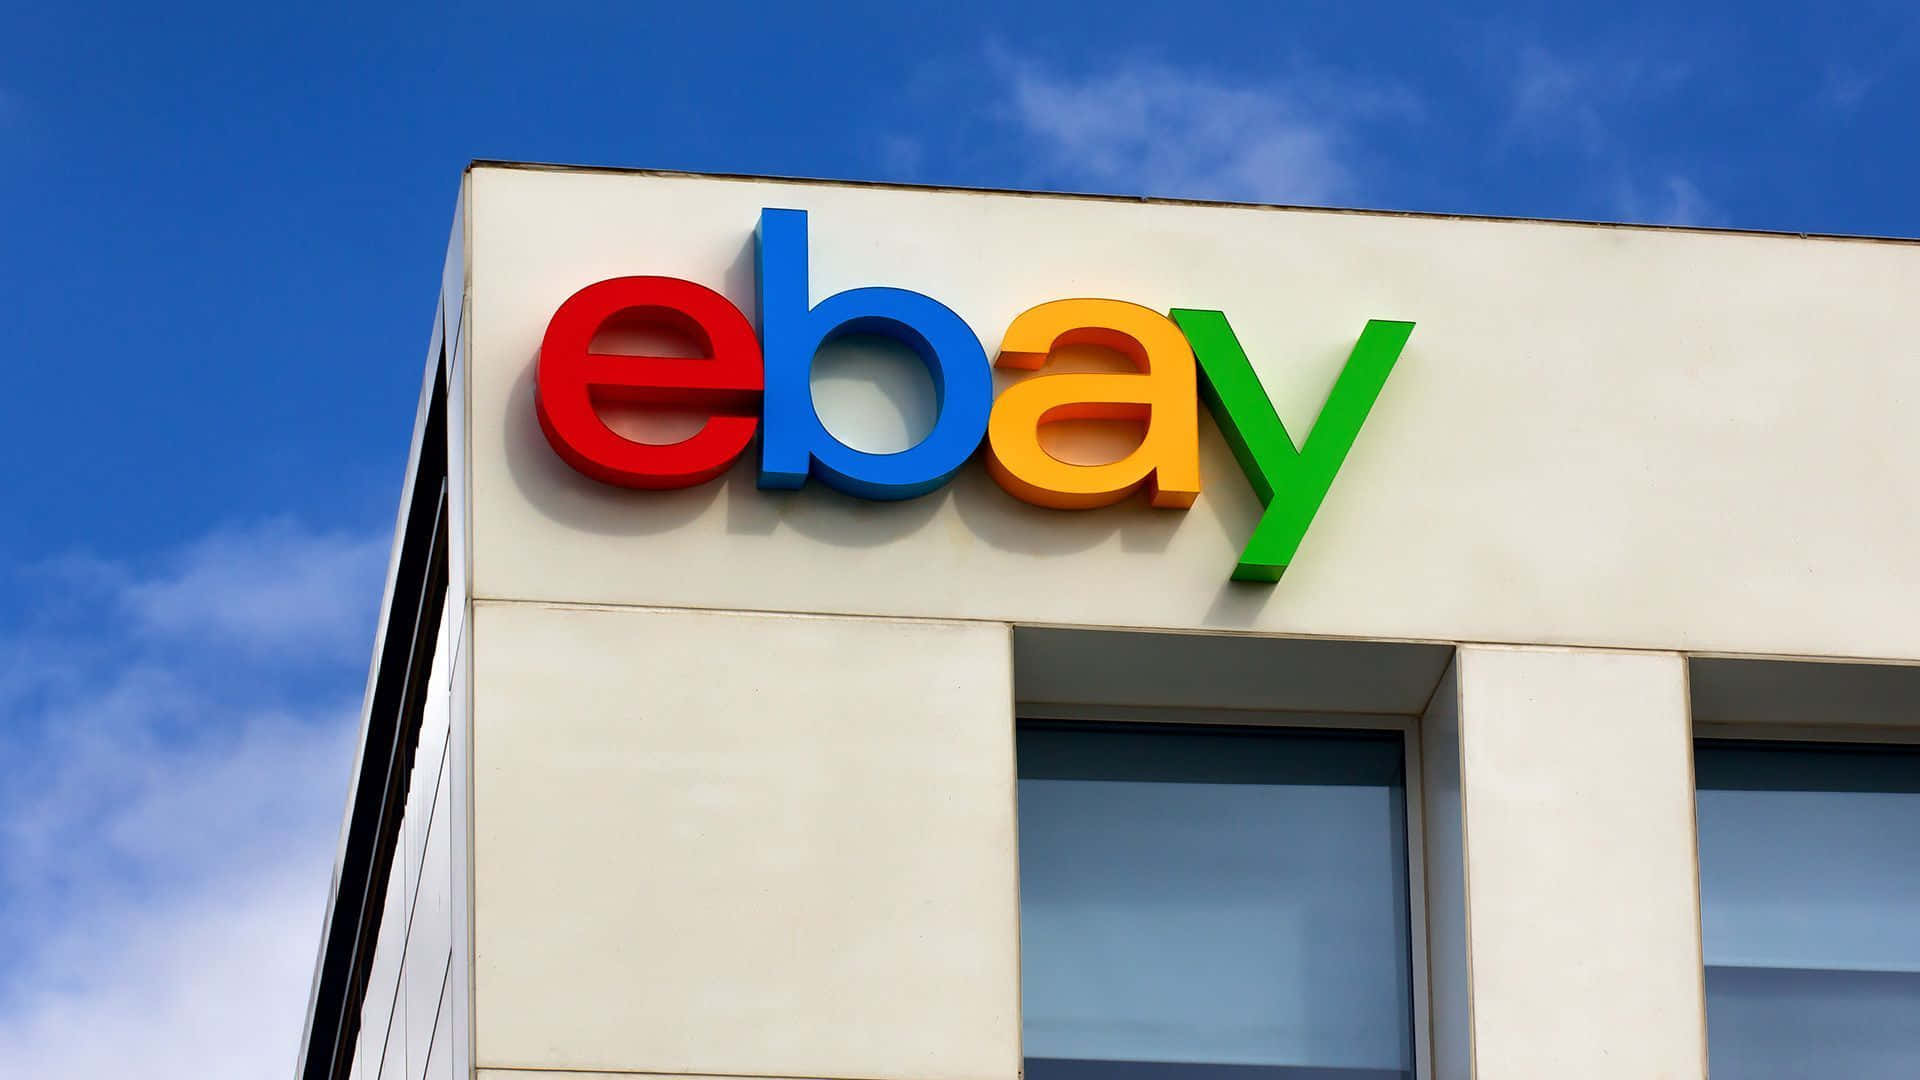 Ebay Logo On The Side Of A Building